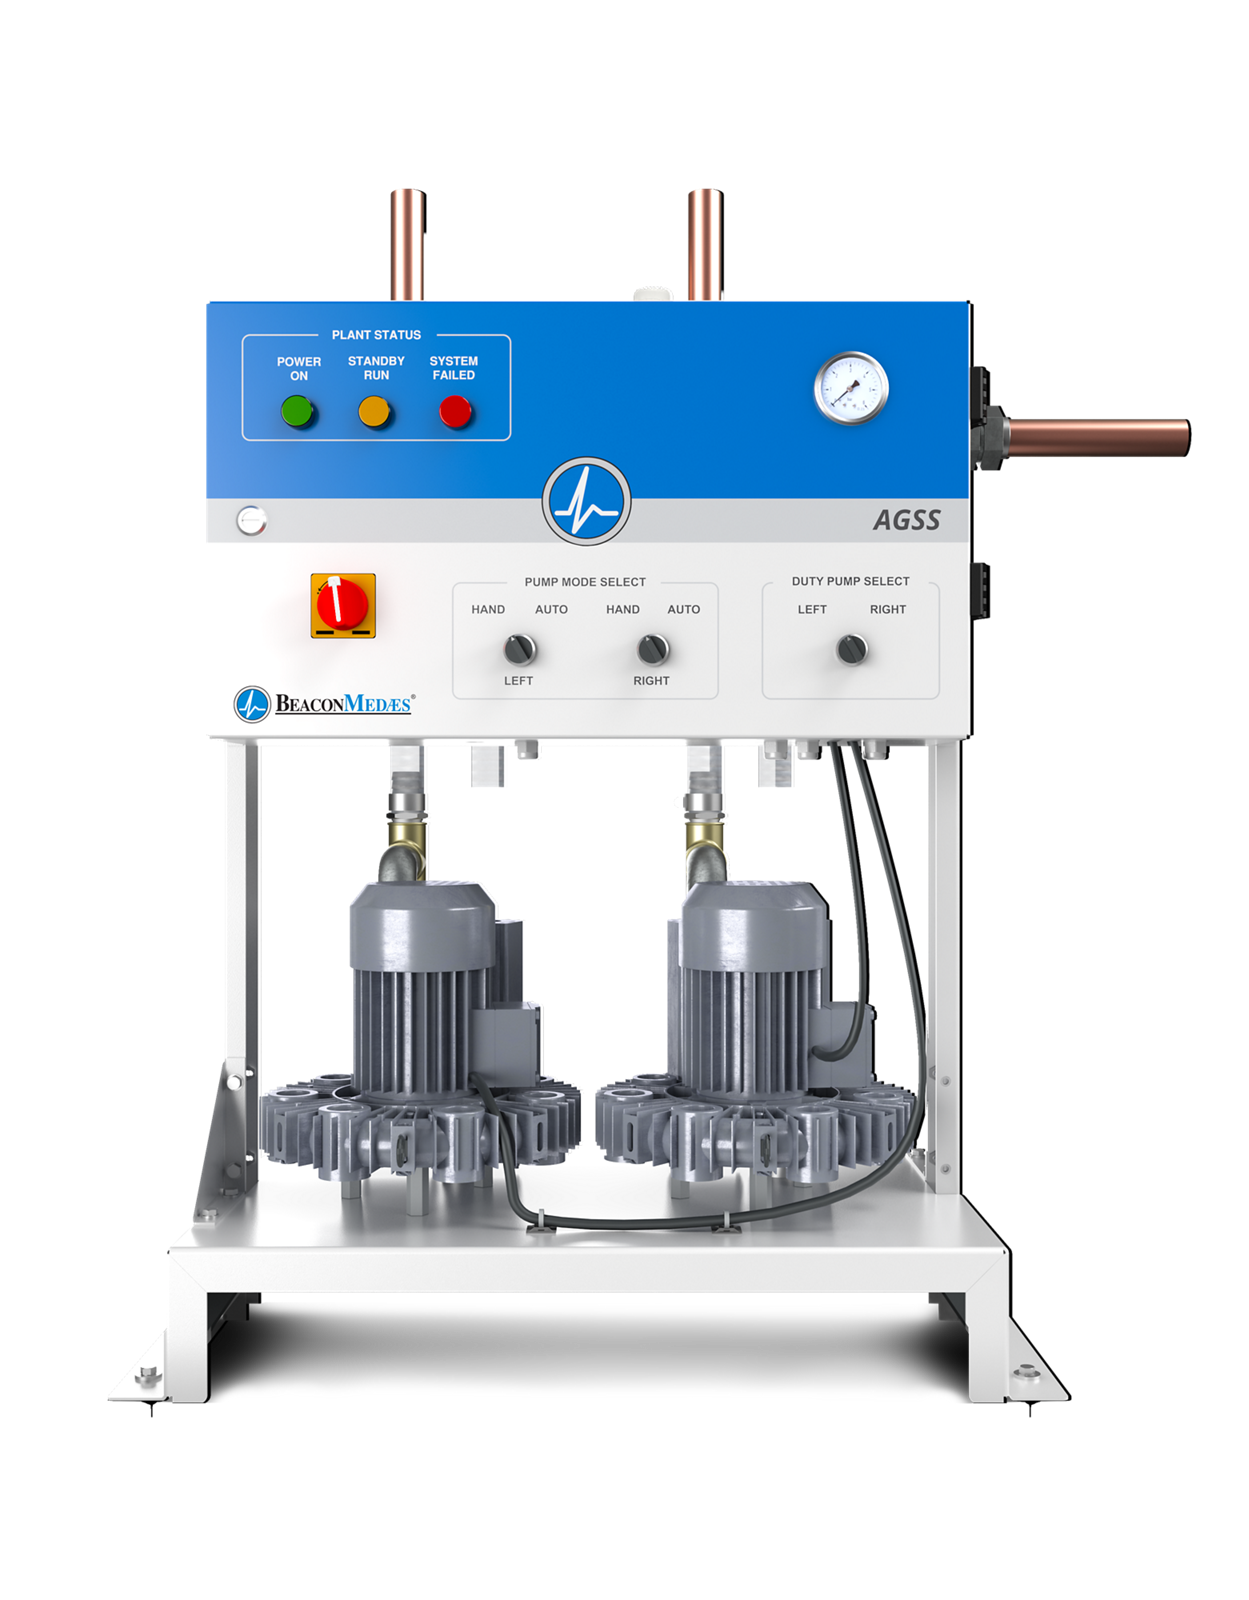 Anesthetic Gas Scavenging System (AGSS)